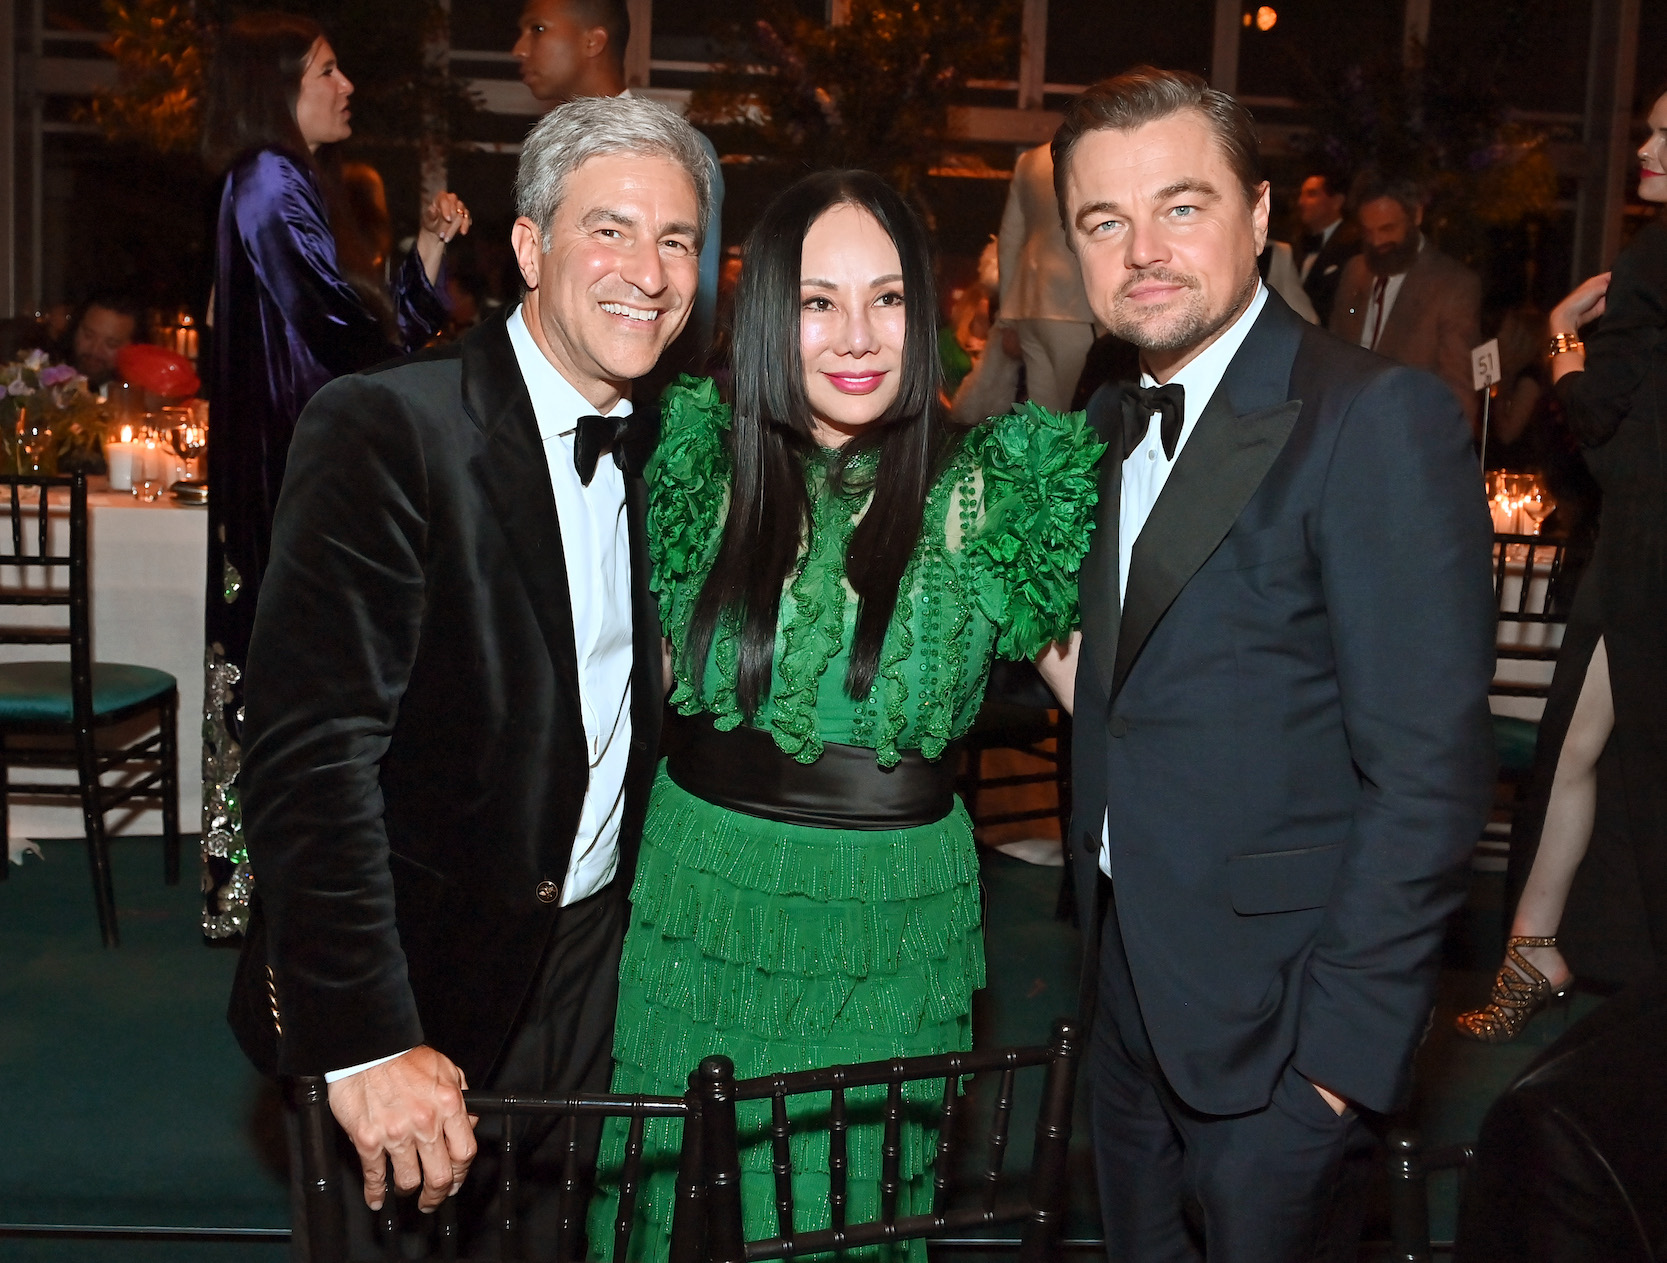  LOS ANGELES, CALIFORNIA - NOVEMBER 06: (L-R) CEO and Wallis Annenberg Director at LACMA Michael Govan, Art+Film Gala Co-Chair Eva Chow, and Art+Film Gala Co-Chair Leonardo DiCaprio, all wearing Gucci, attend the 10th Annual LACMA ART+FILM GALA honoring Amy Sherald, Kehinde Wiley, and Steven Spielberg presented by Gucci at Los Angeles County Museum of Art on November 06, 2021 in Los Angeles, California. (Photo by Stefanie Keenan/Getty Images for LACMA)